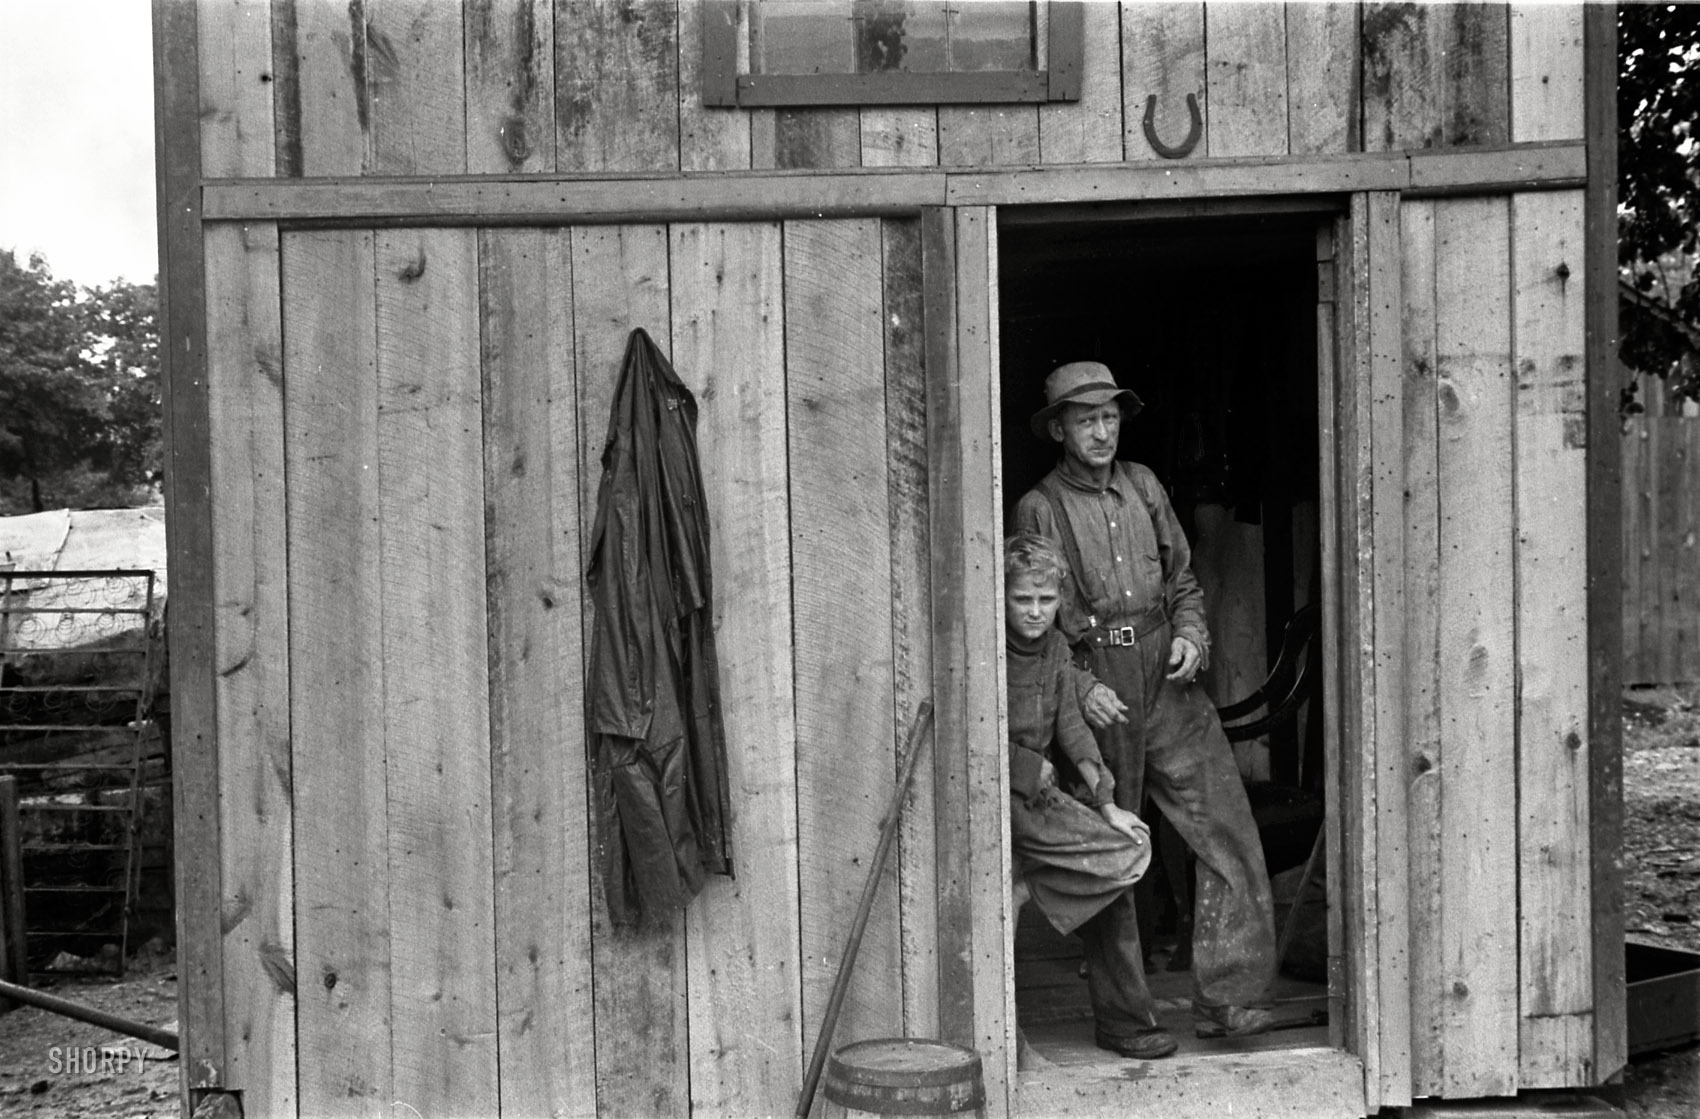 Summer 1938. Circleville, Ohio. "Dwellers in Circleville's 'Hooverville.' During Depression many farms of the district were foreclosed. People who lost homes naturally gravitated toward the town. A town of its character is unable to house new influx of population. Consequently there sprang up around it an extensive Hooverville." 35mm nitrate negative by Ben Shahn. View full size.